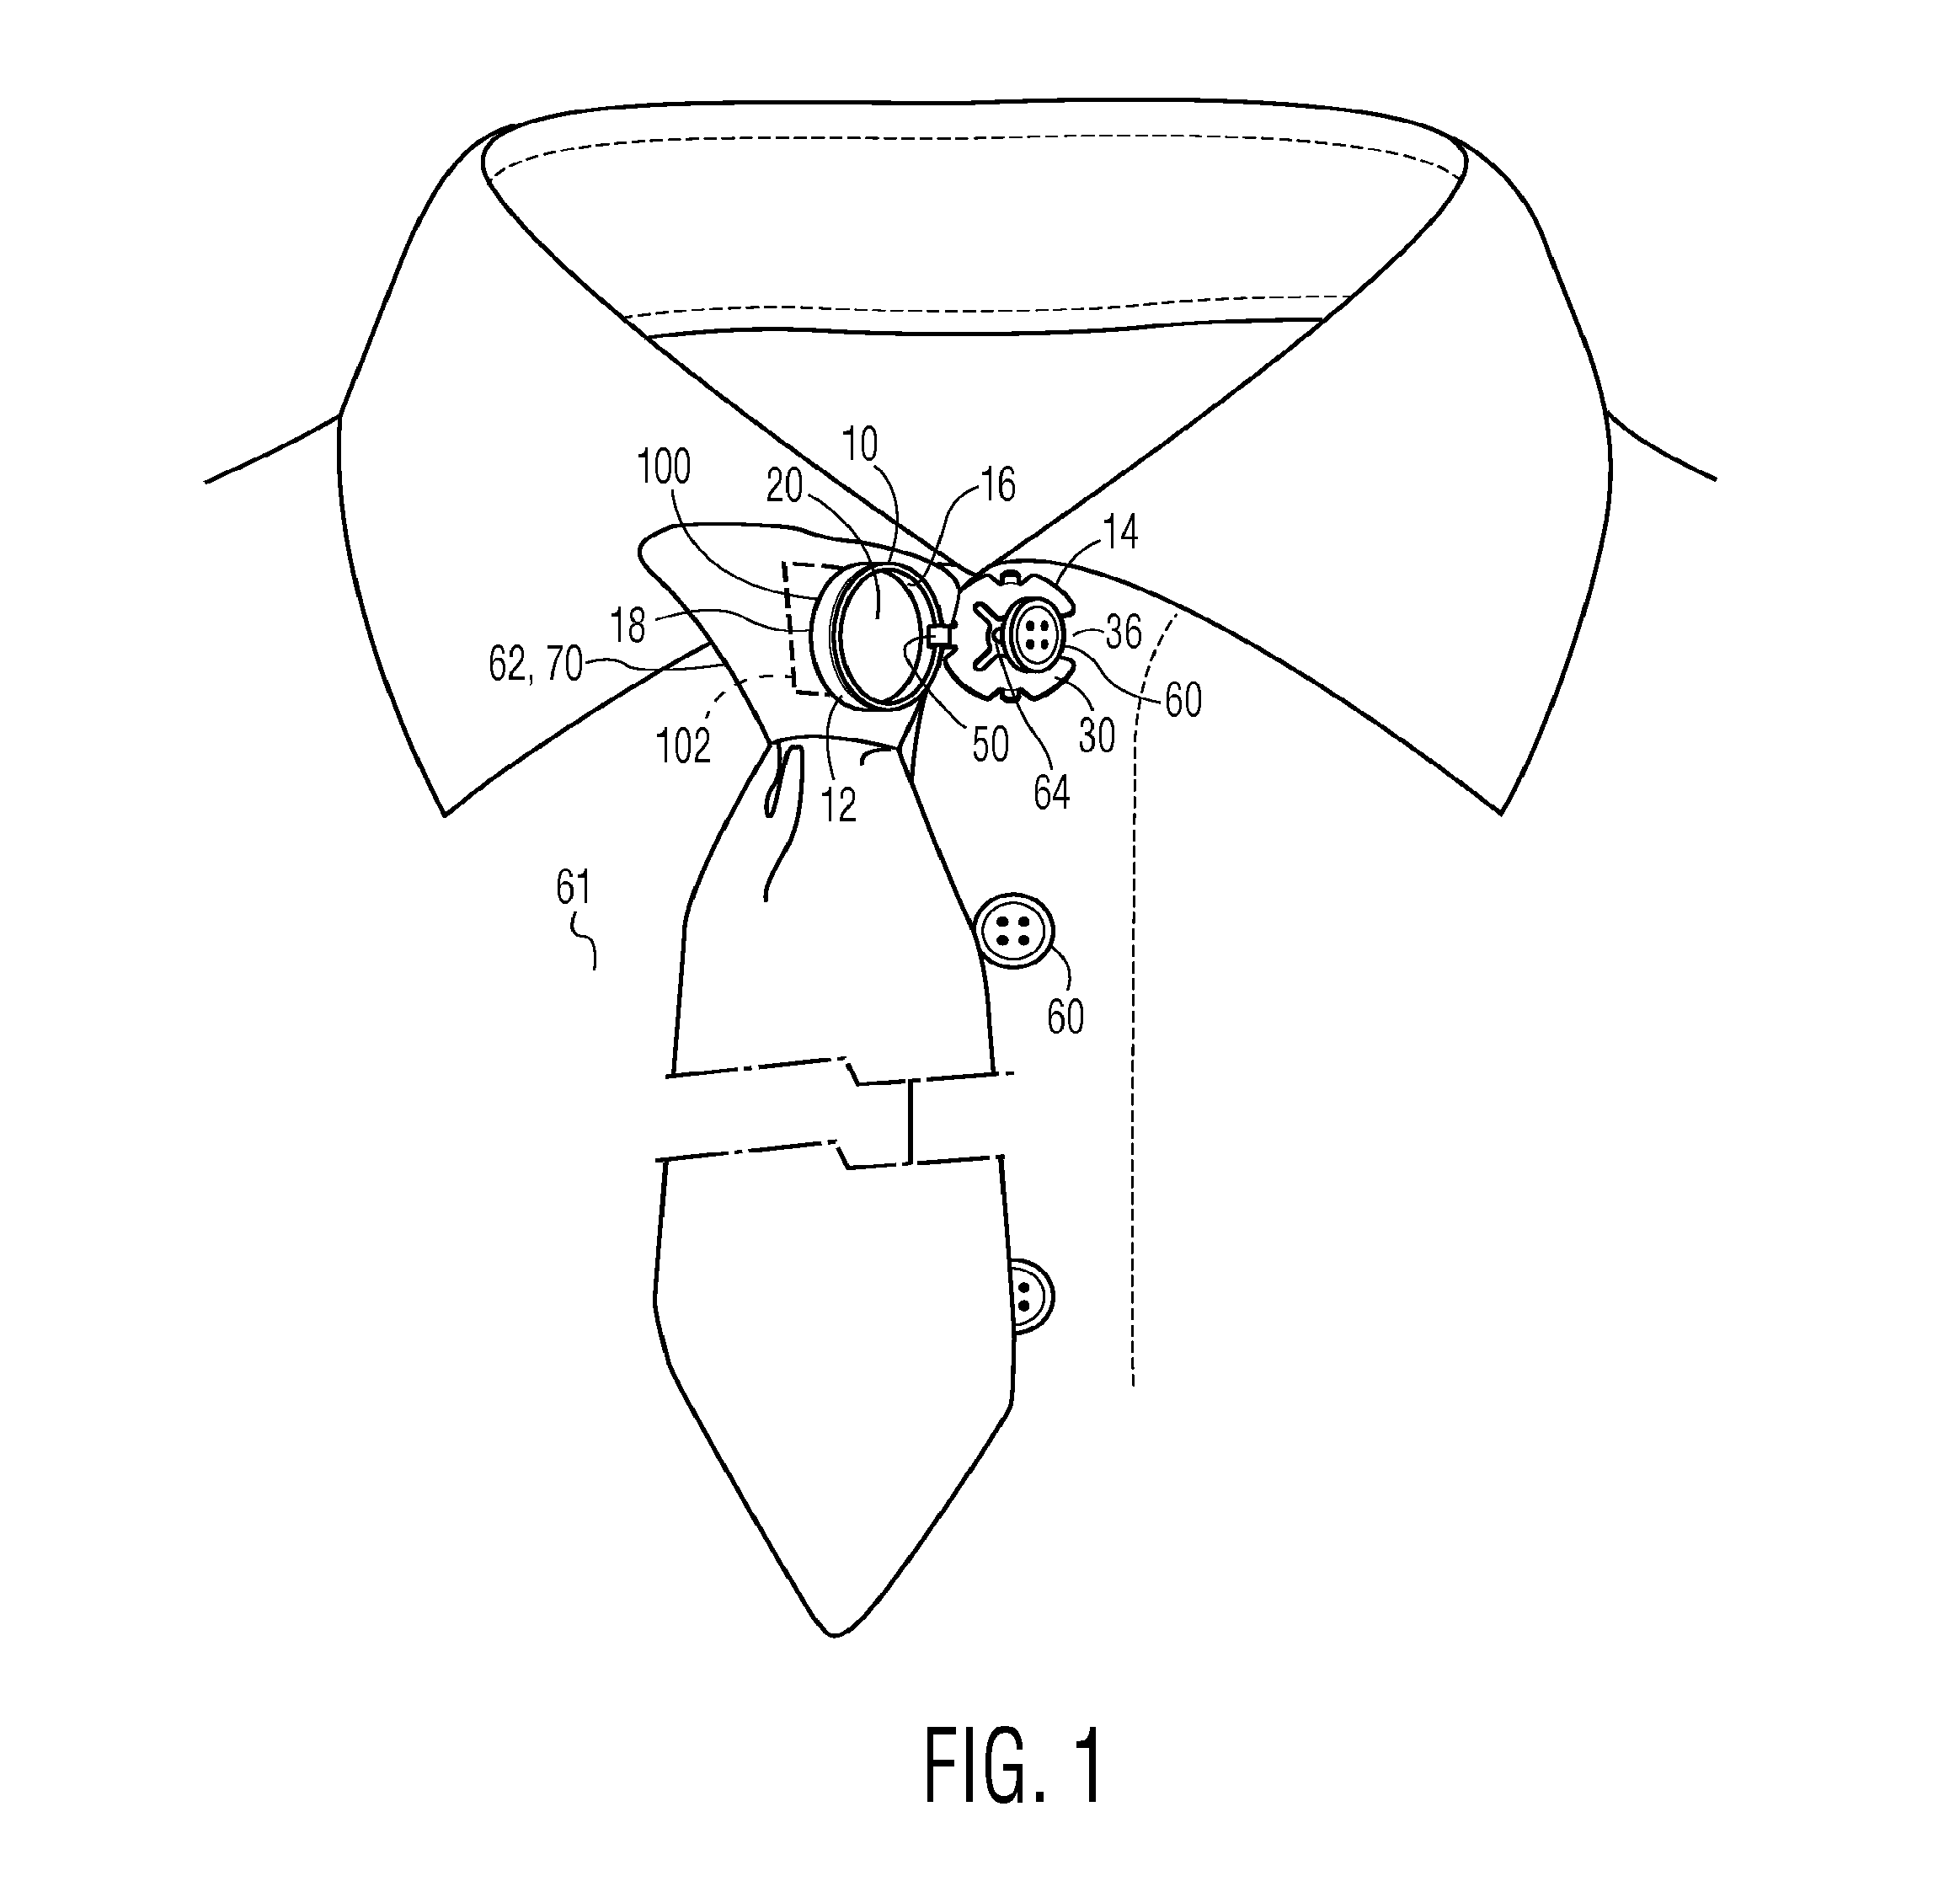 Magnetic attachment device for releasably attaching an article to a button